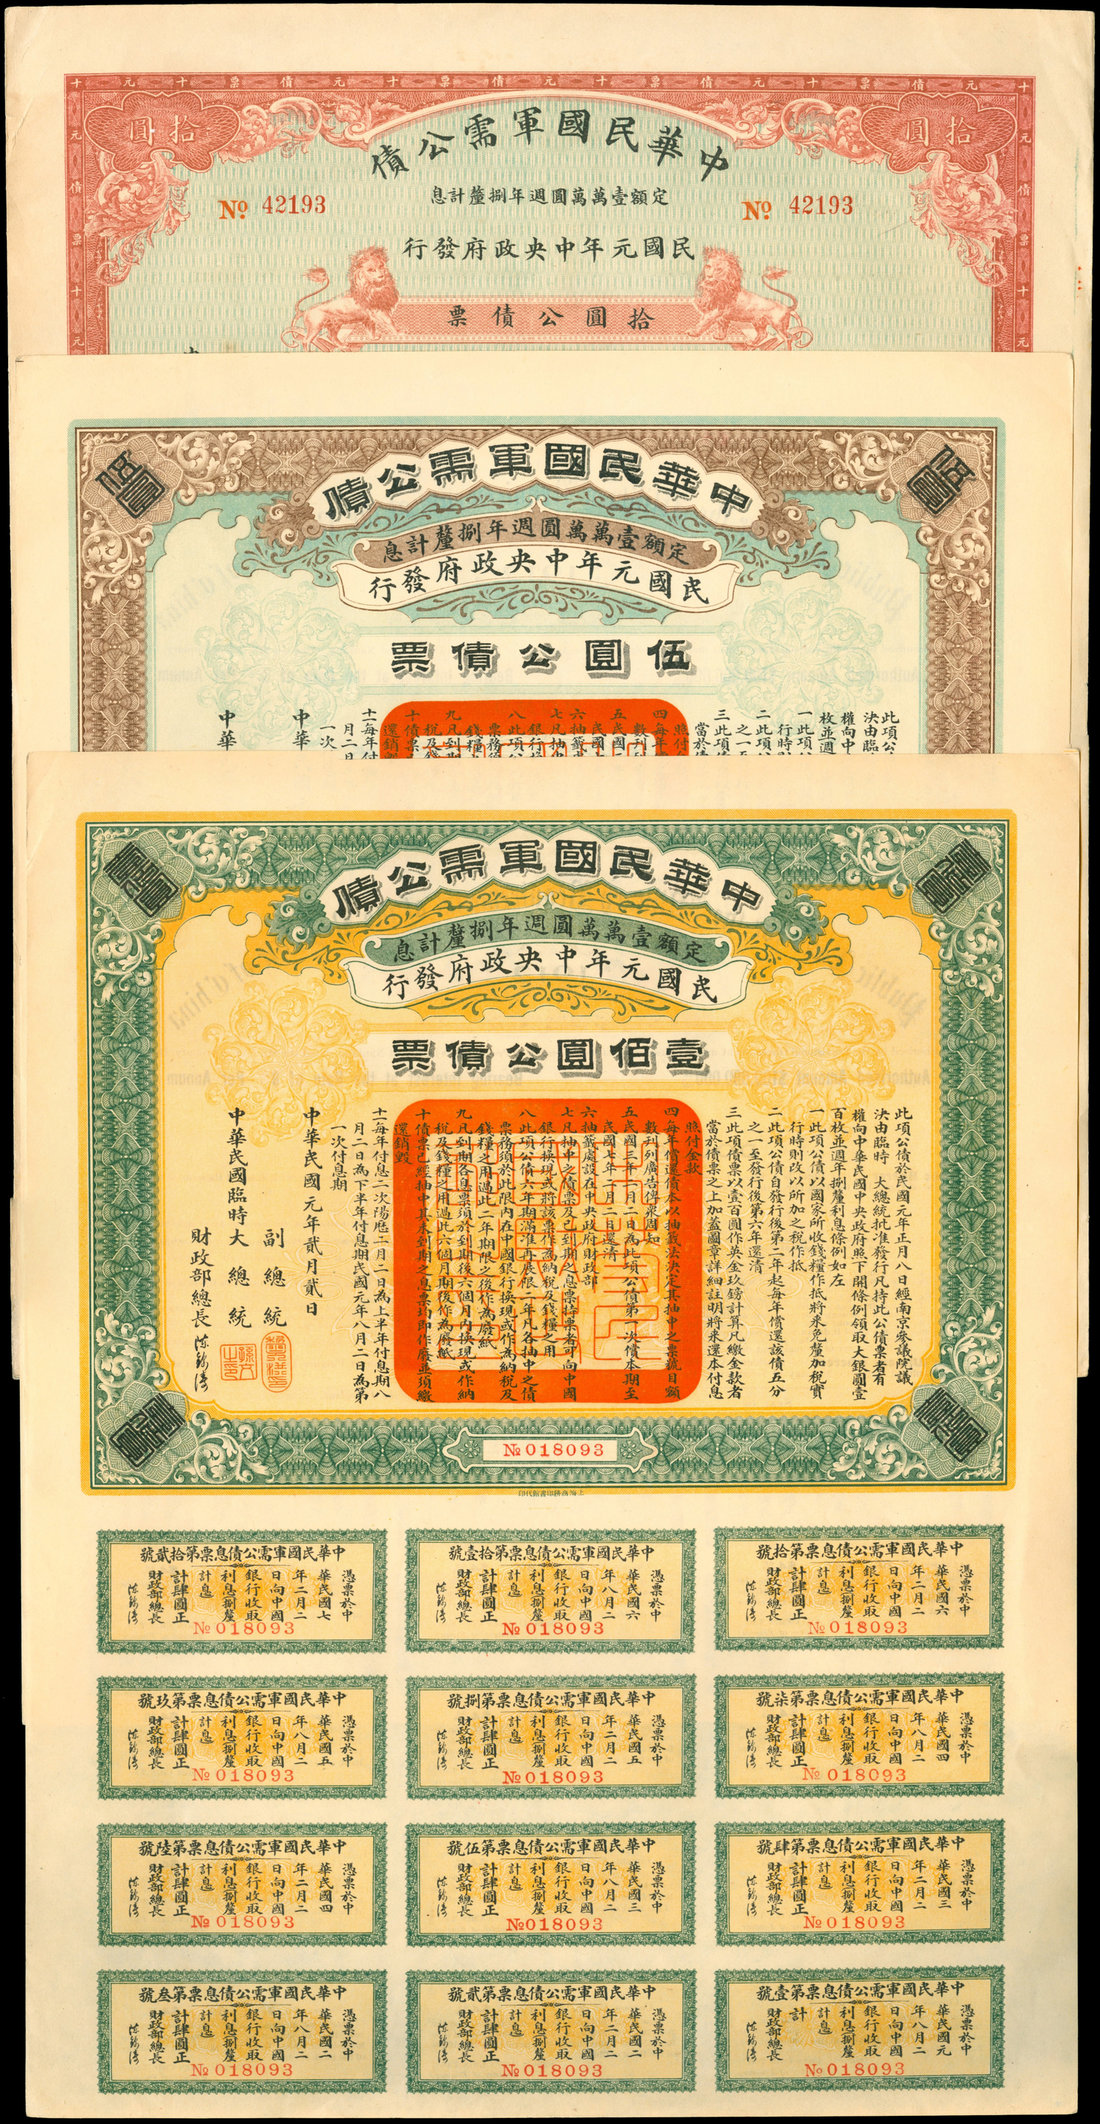 Public Loan for the Military Requirements of the Republic of China, a set of 3 bonds for $5, $10 an